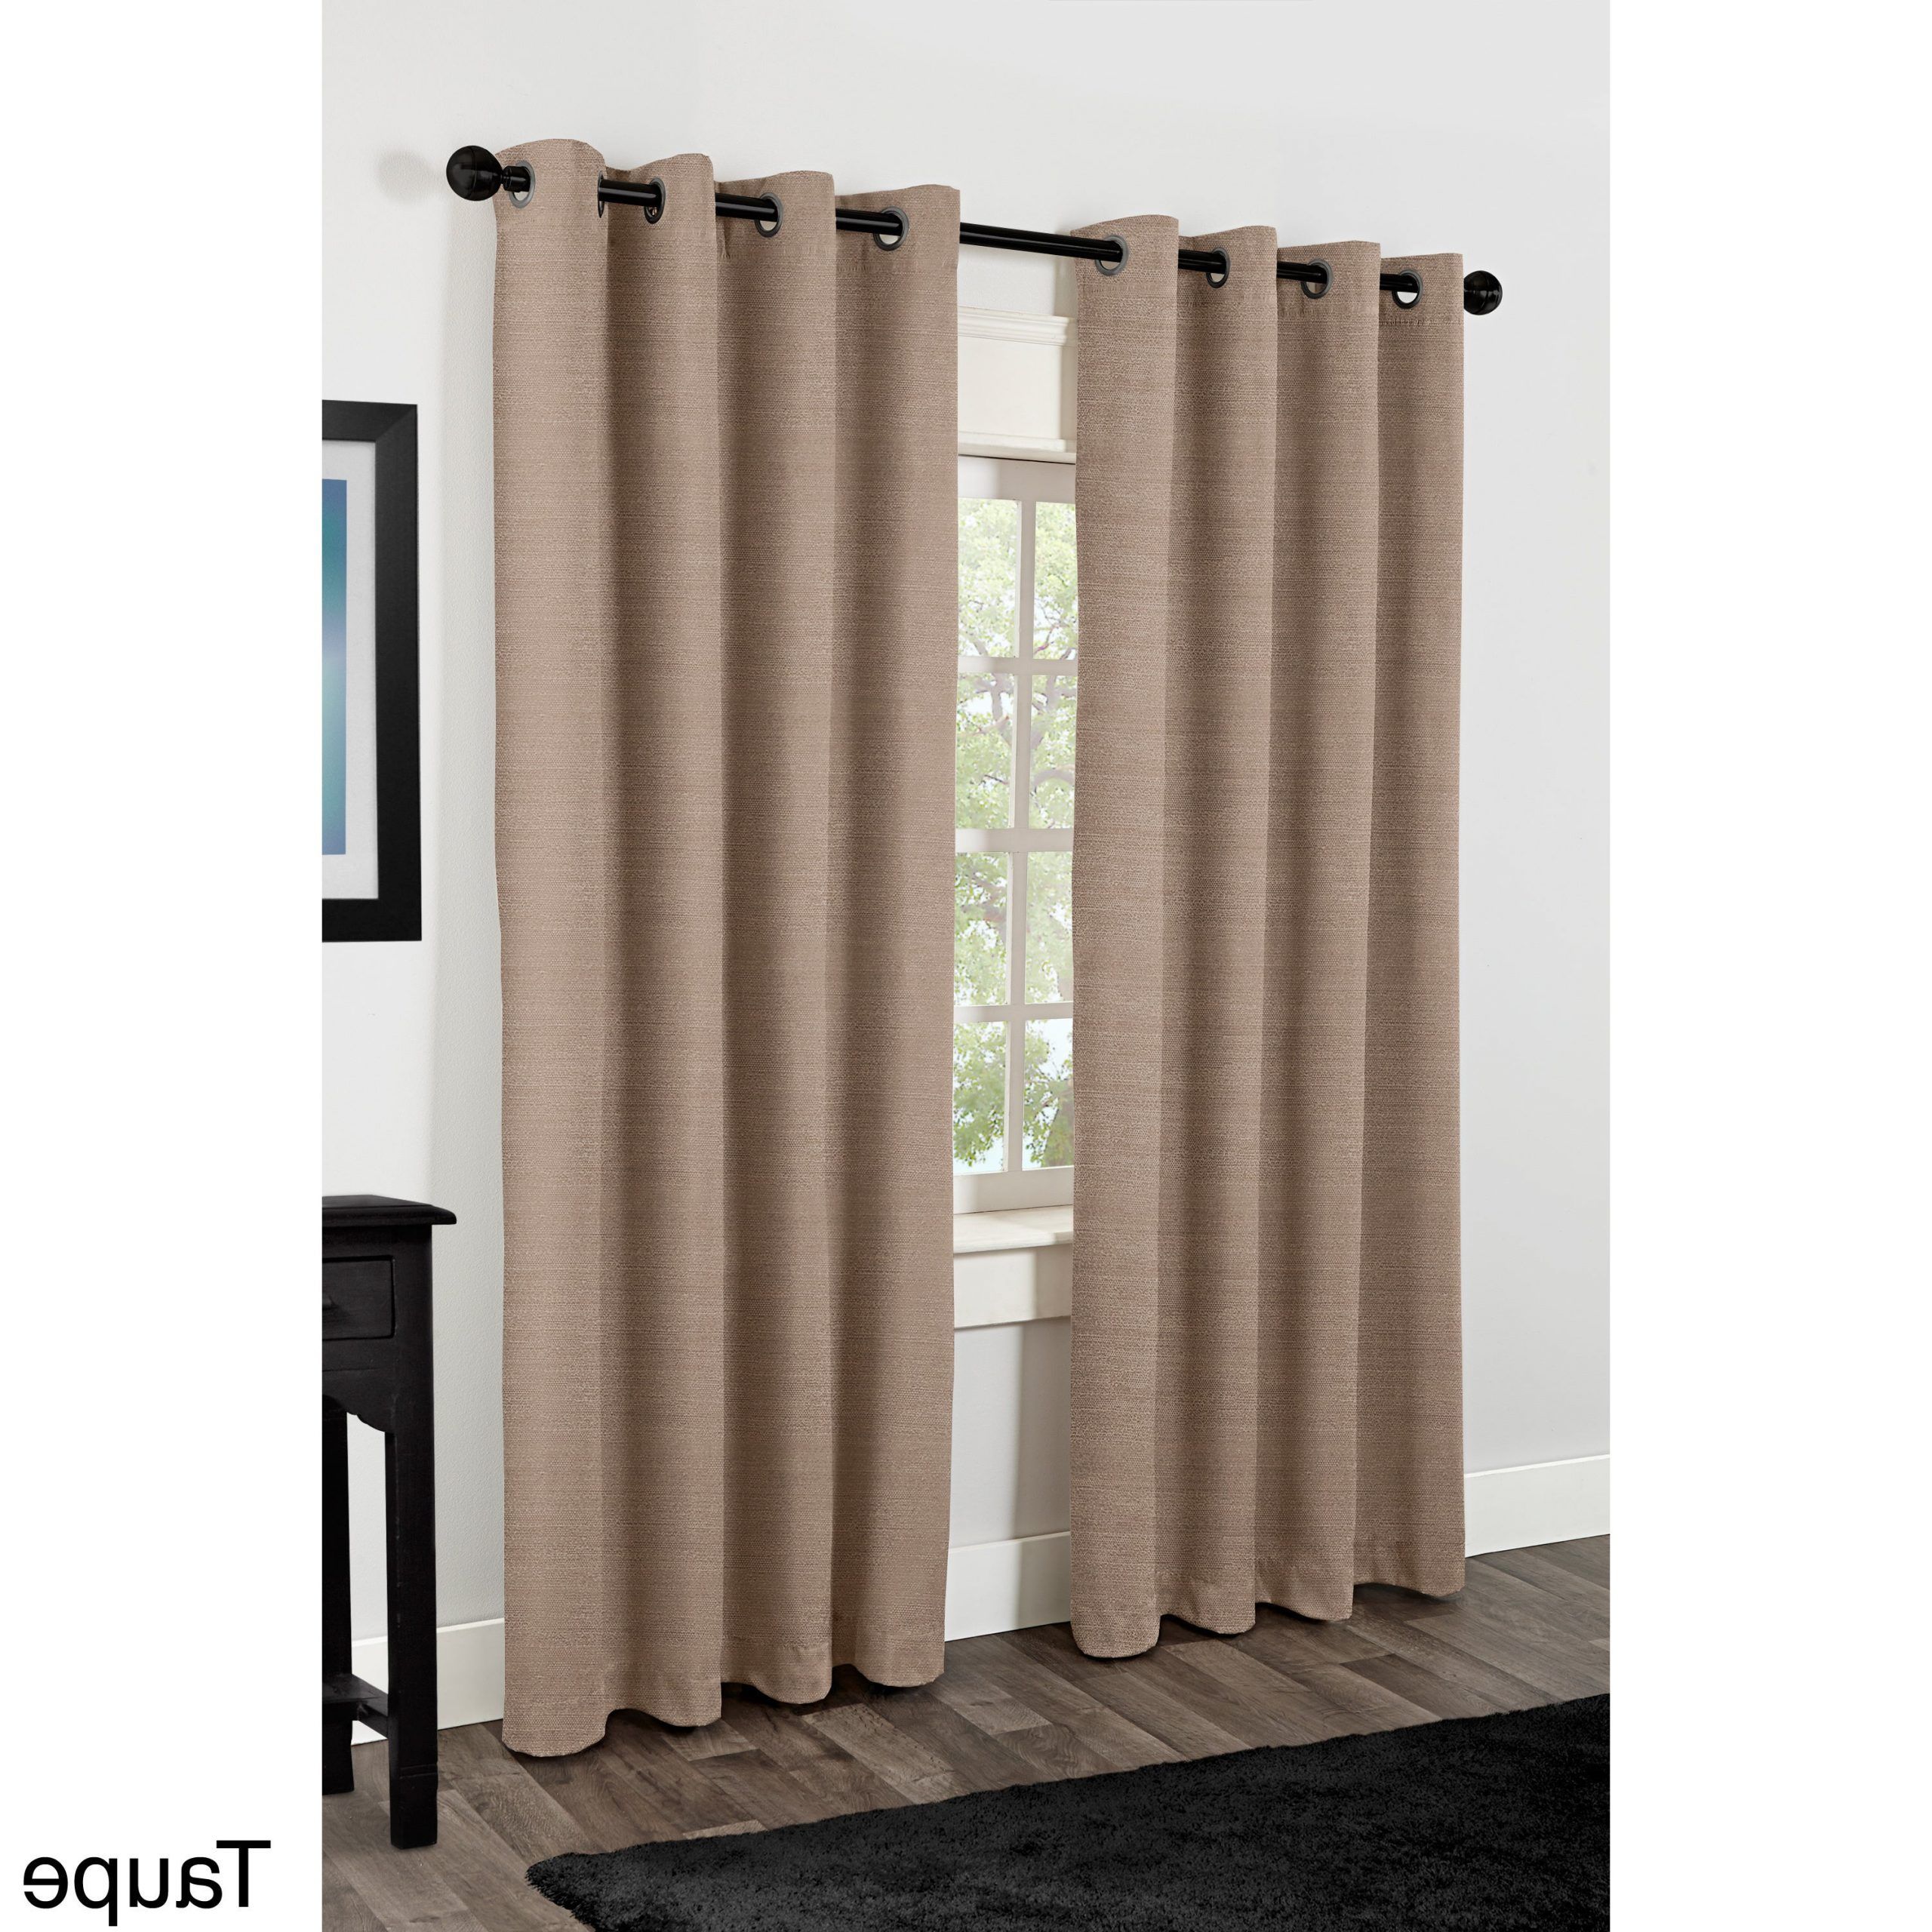 Most Recently Released Raw Silk Thermal Insulated Grommet Top Curtain Panel Pair – Taupe – 84  Inches (as Is Item) With Regard To Raw Silk Thermal Insulated Grommet Top Curtain Panel Pairs (View 6 of 20)